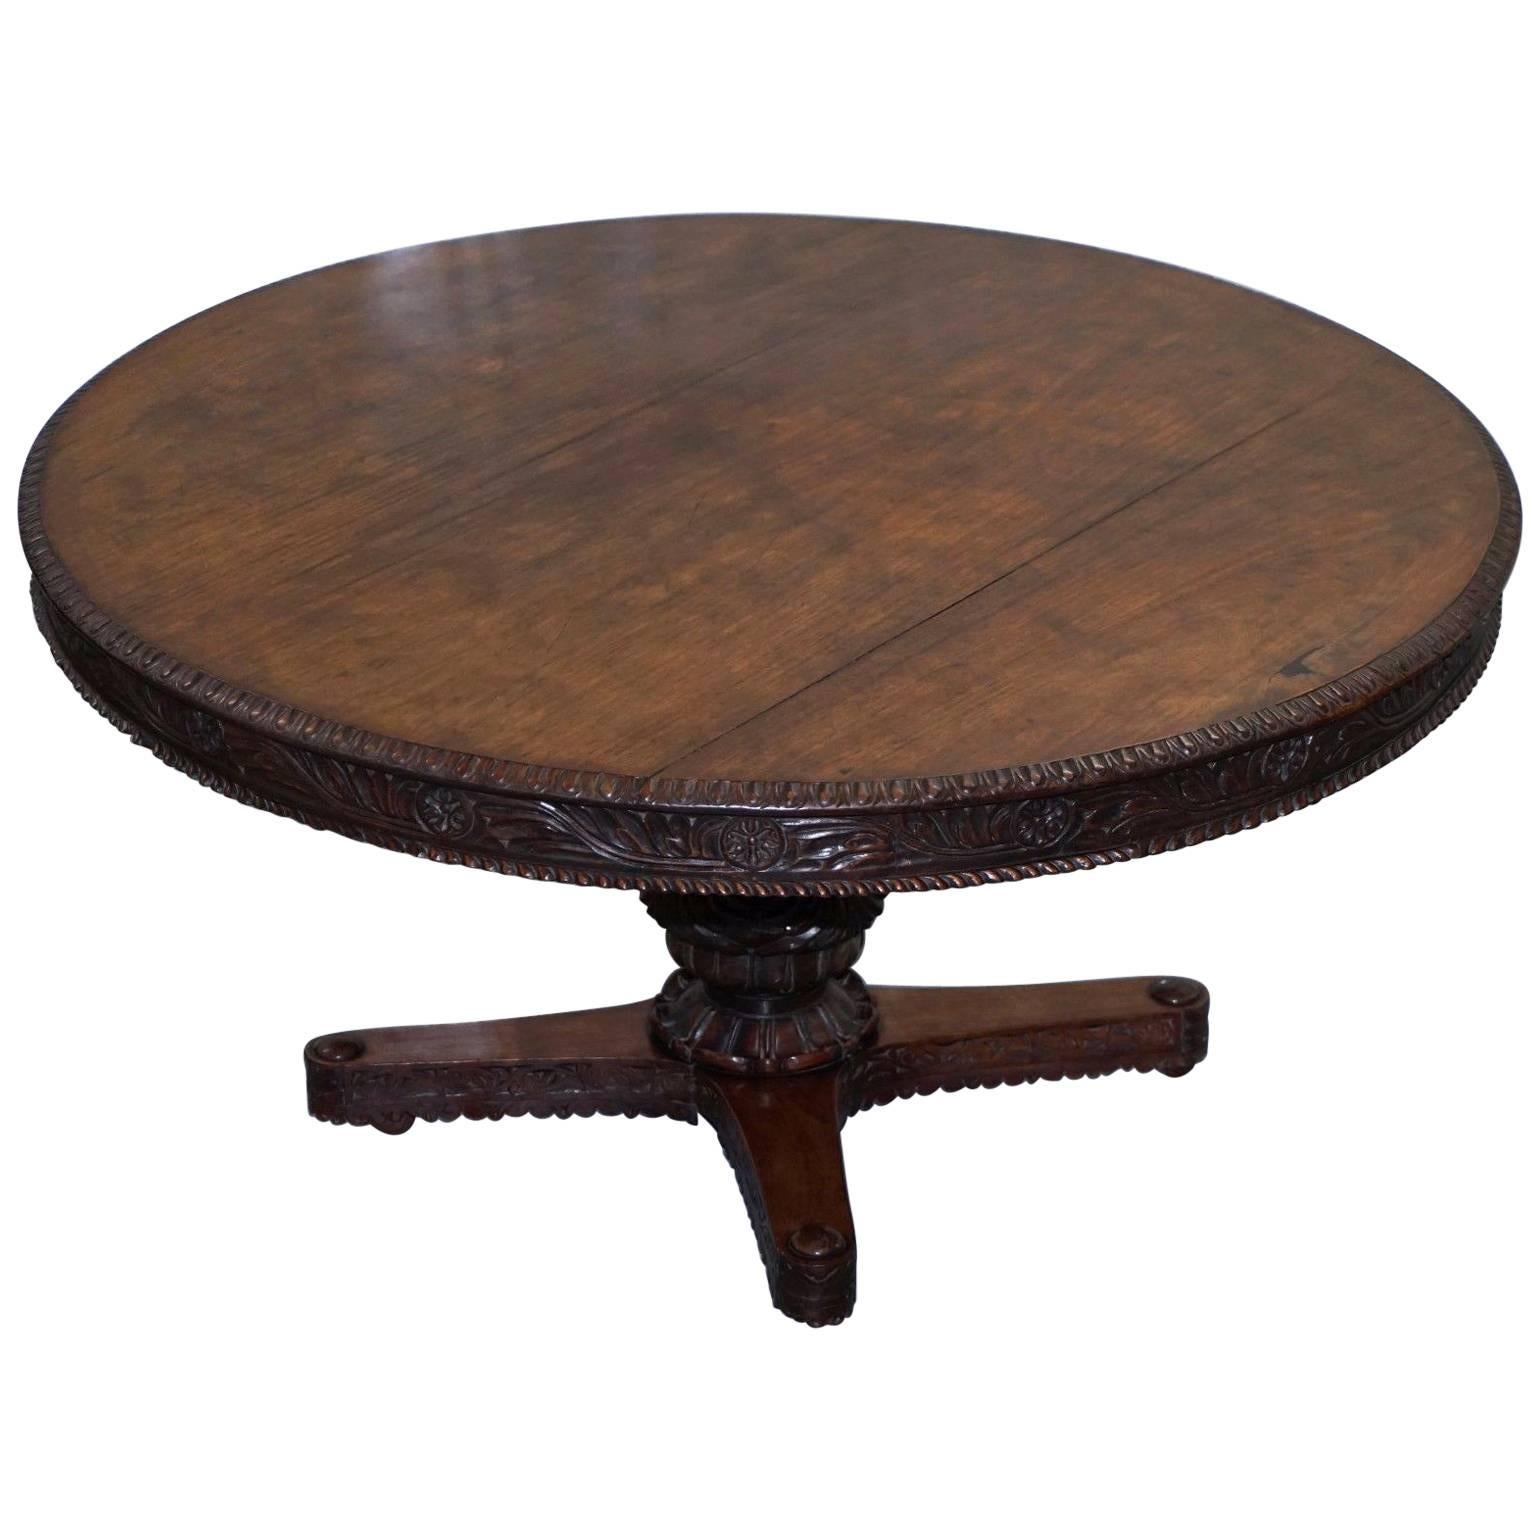 Very Rare 19th Century Hand-Carved Wood Anglo-Indian Padouk Dining Center Table